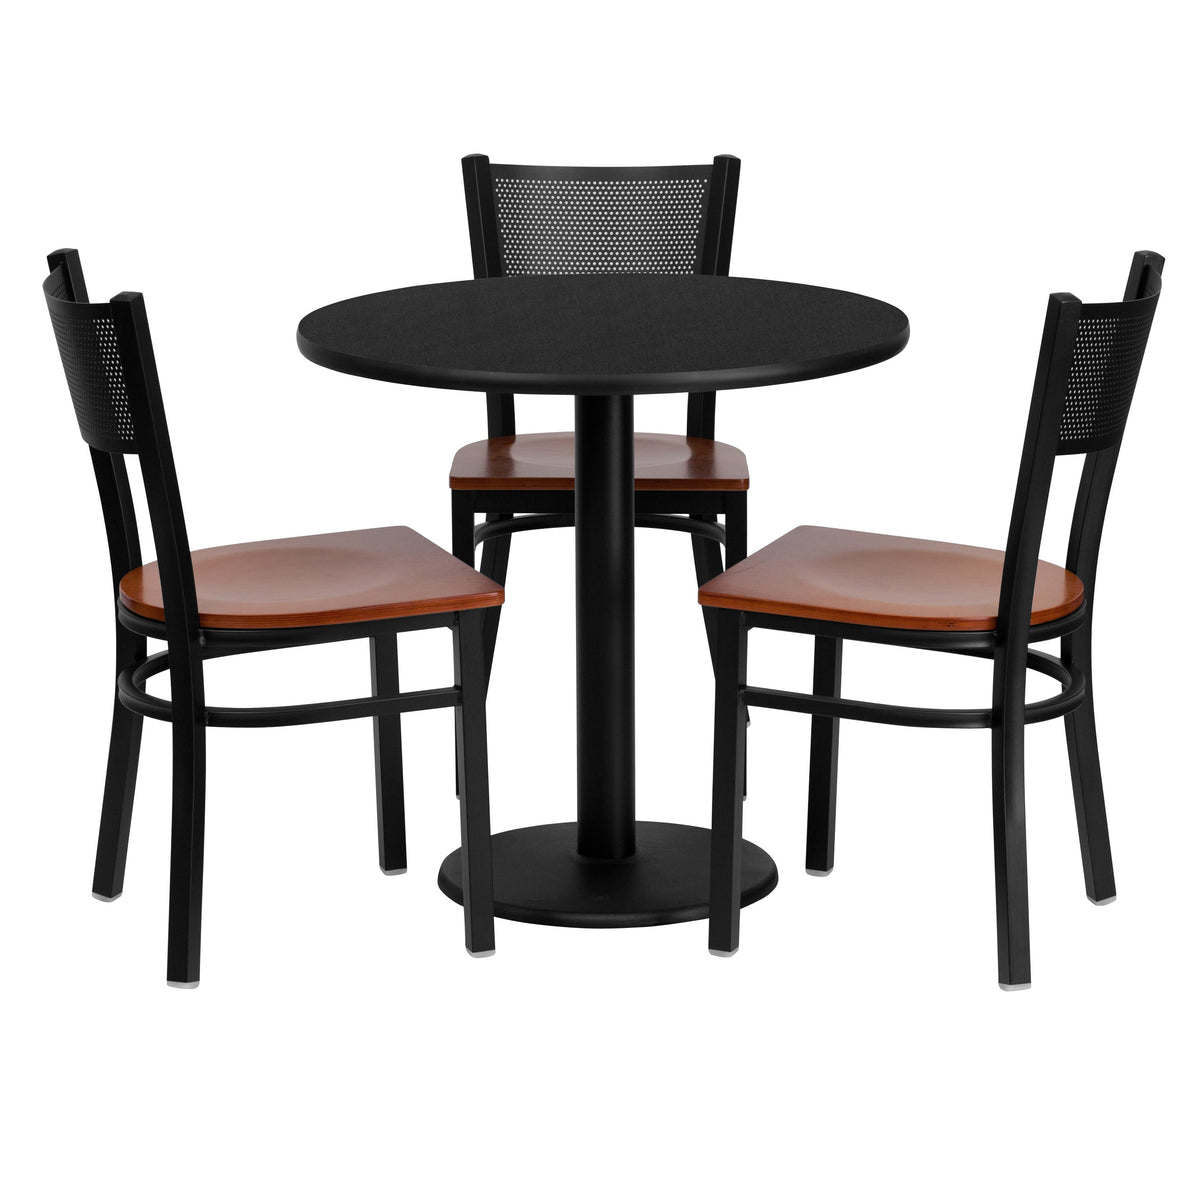 30inch Round Black Laminate Table Set with 3 Metal Chairs - Cherry Wood Seat